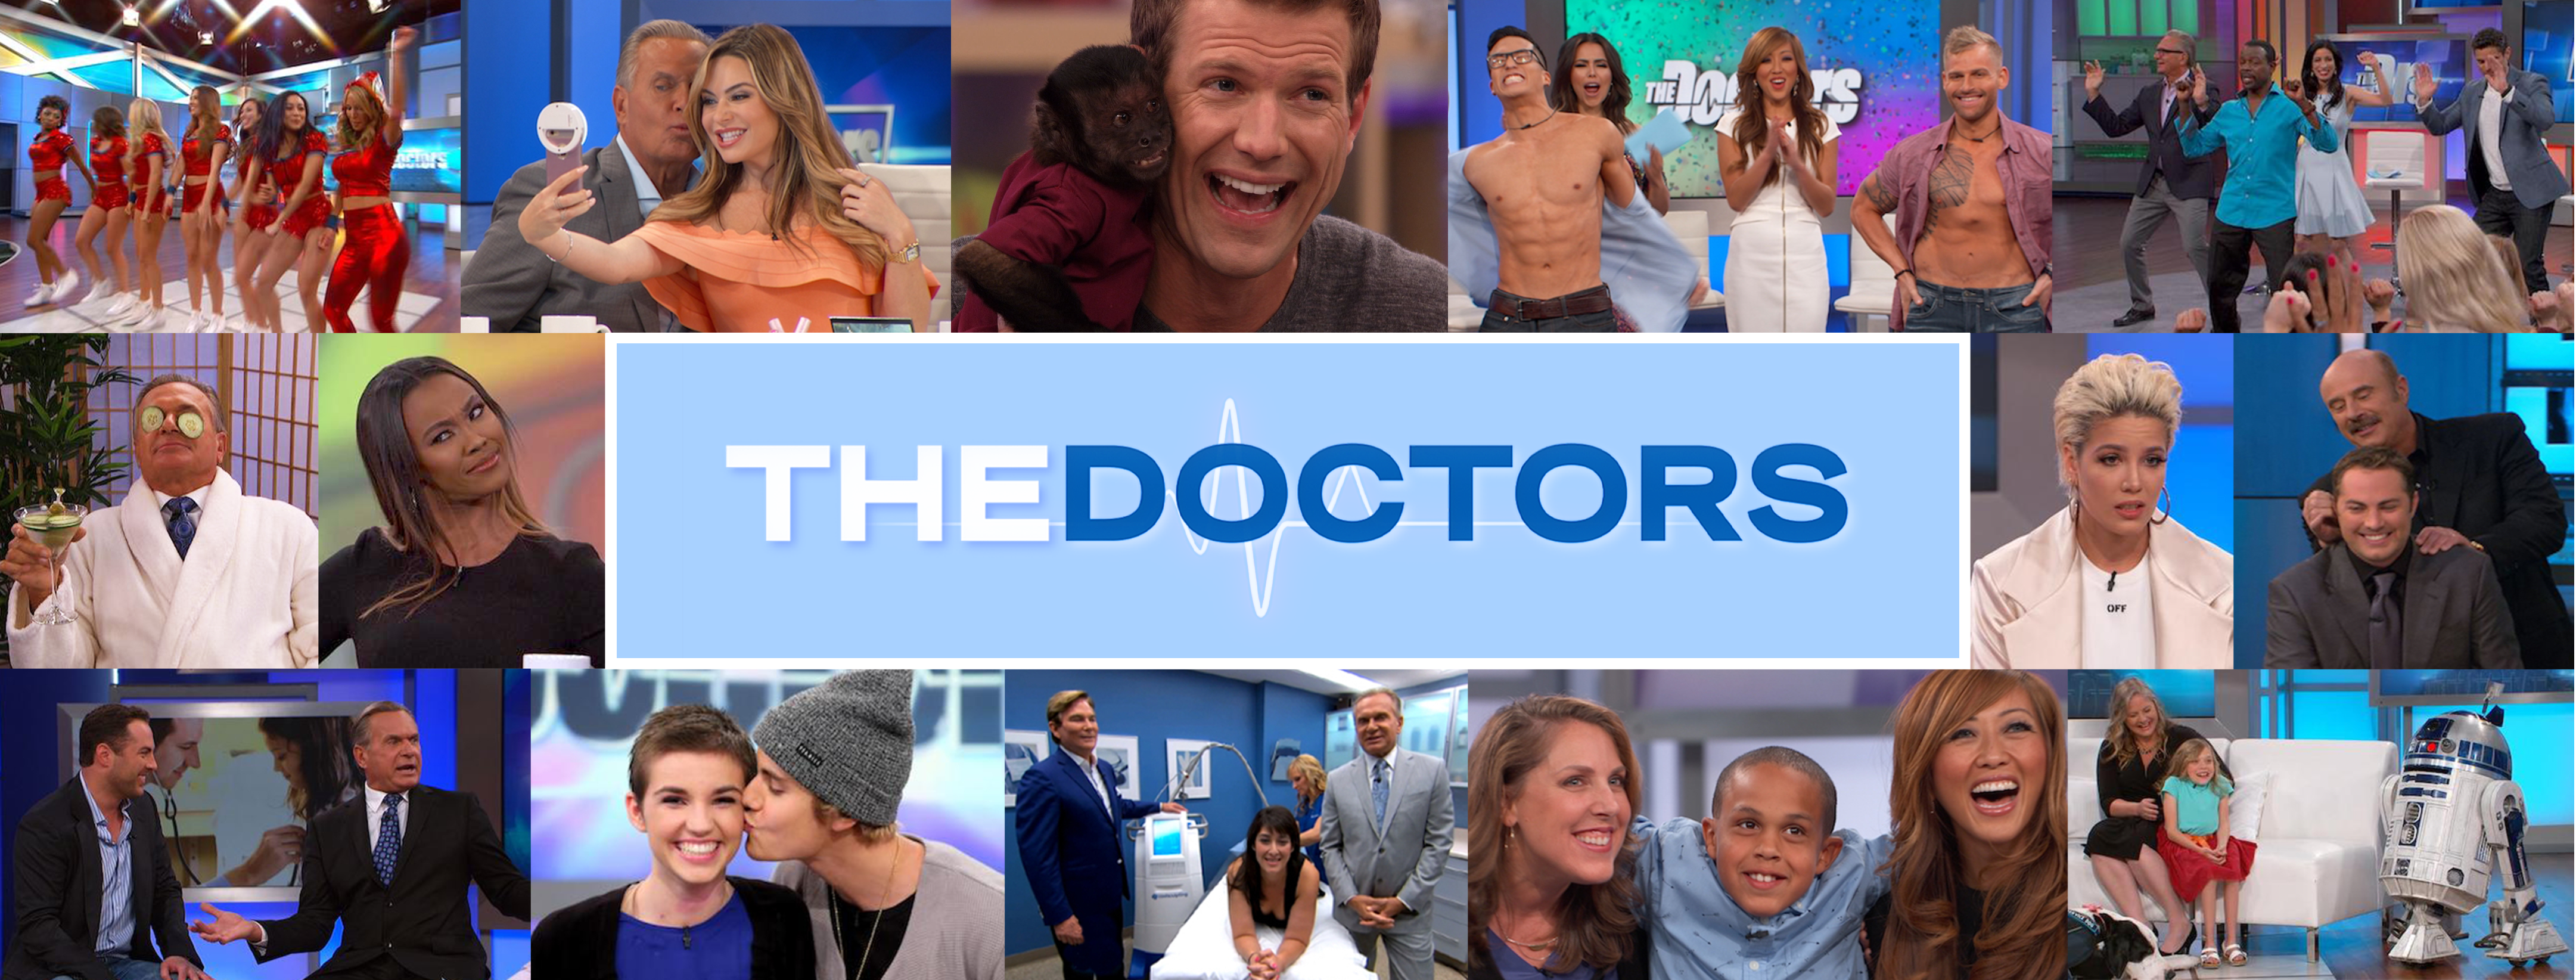 The Doctors panel in front of #Askthedoctors screen